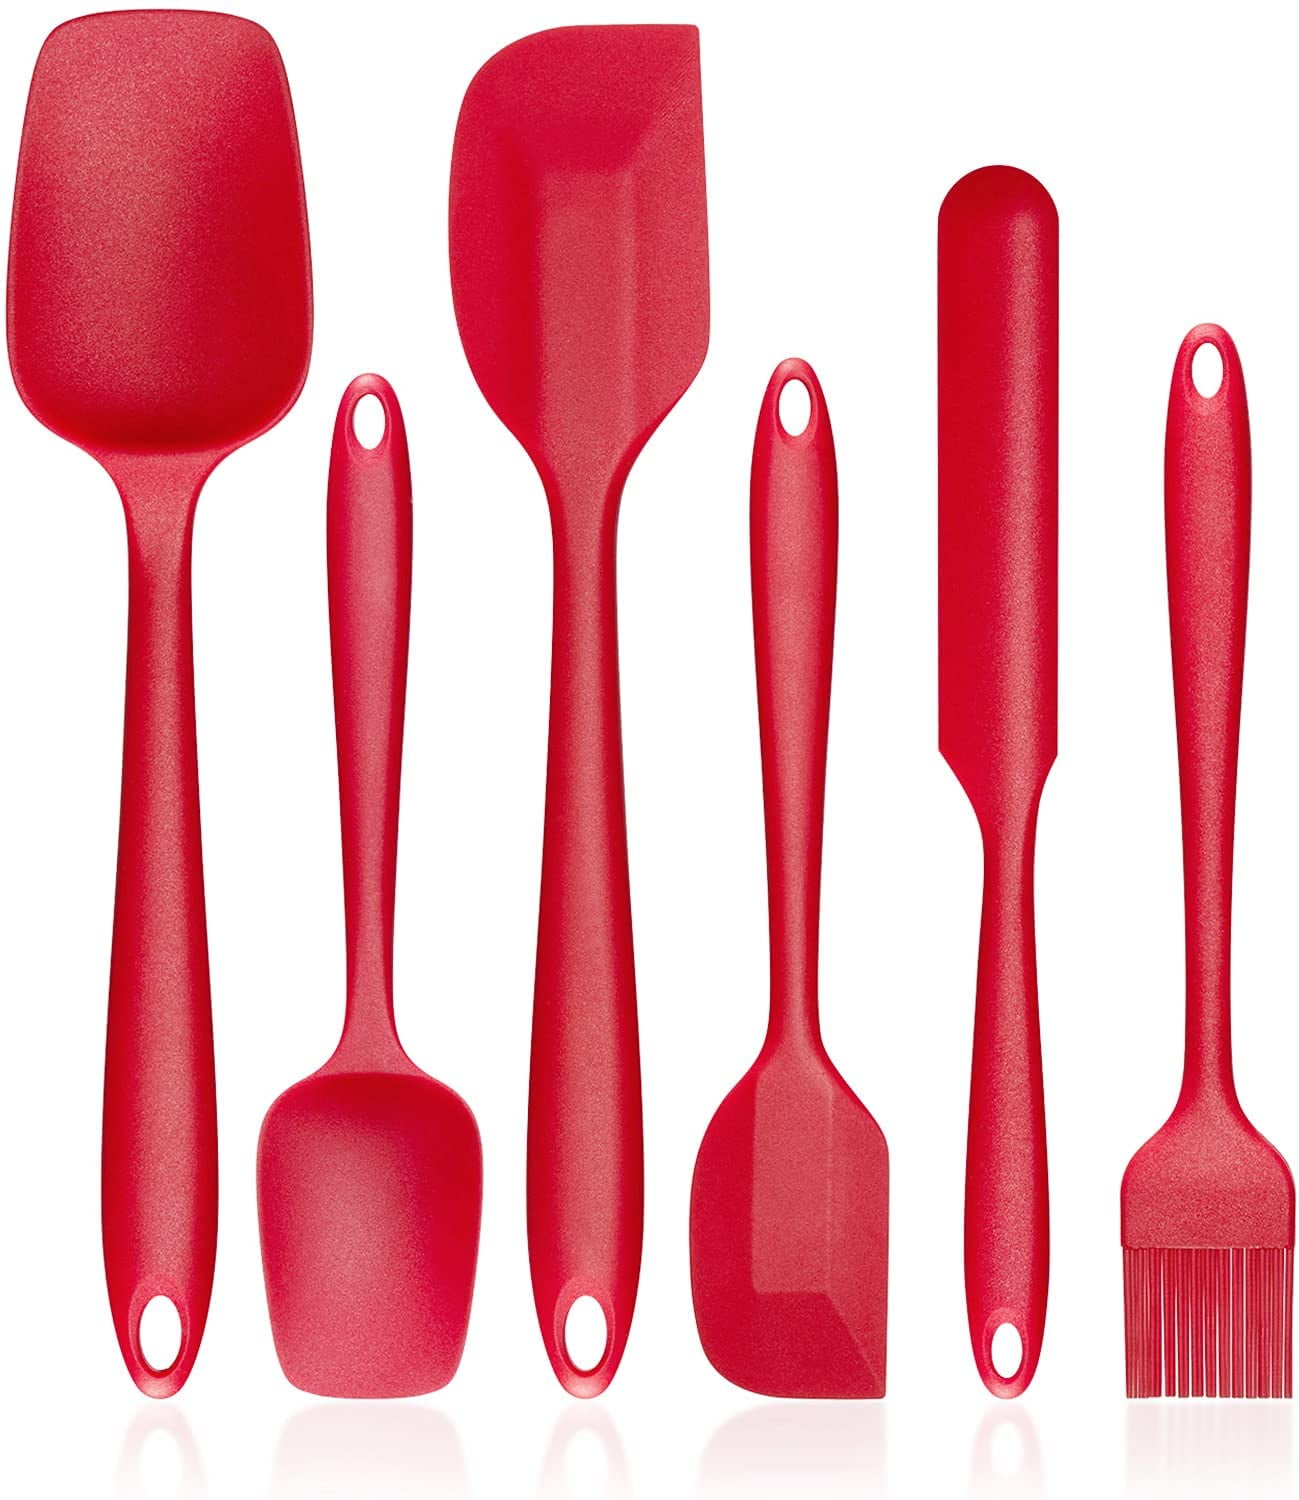 Details about   Silicone Spatula Heat Resistant Non Stick for Kitchen Cooking Baking